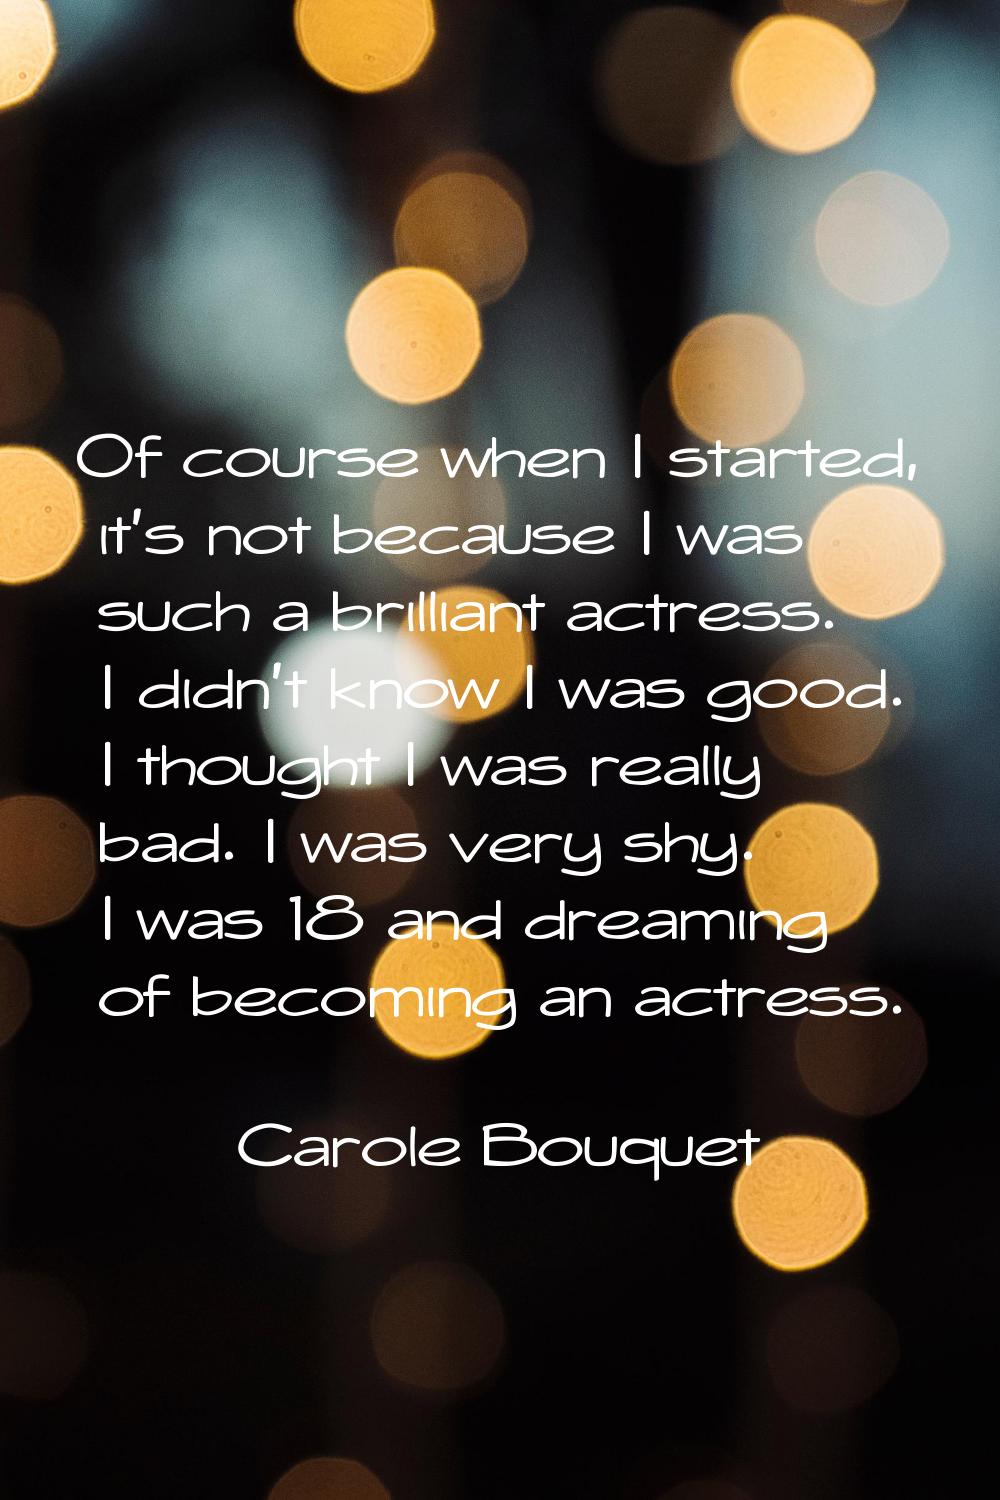 Of course when I started, it's not because I was such a brilliant actress. I didn't know I was good